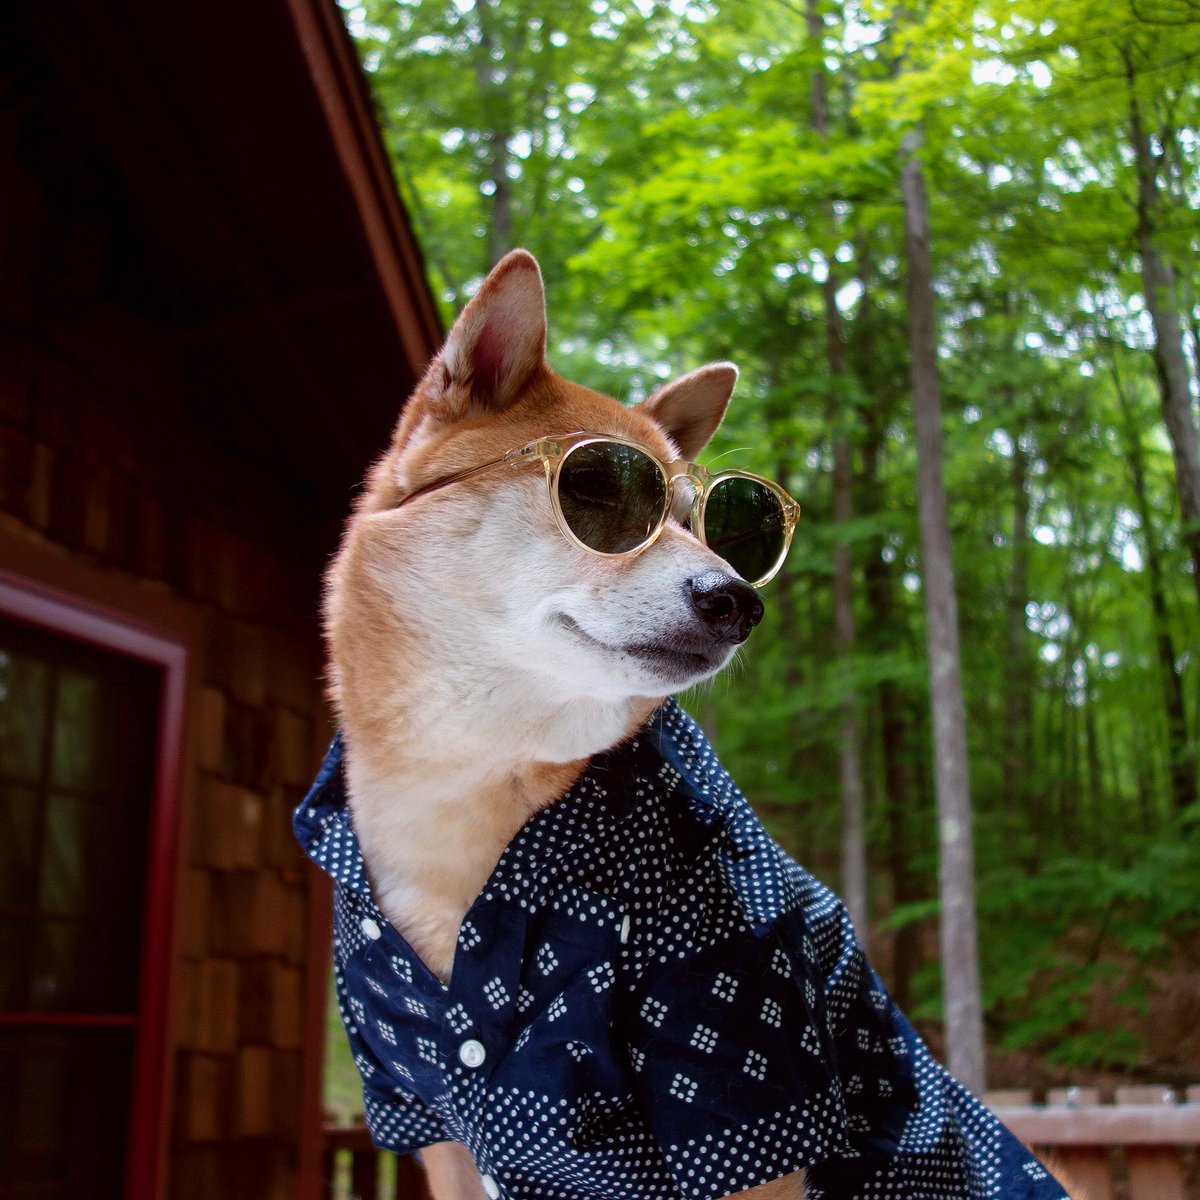 Menswear Dog on Twitter: "Don't mean sound conceited or anything but this must be one of my best angles 😎✨ #fierce #workit https://t.co/s3W53YVcFX"